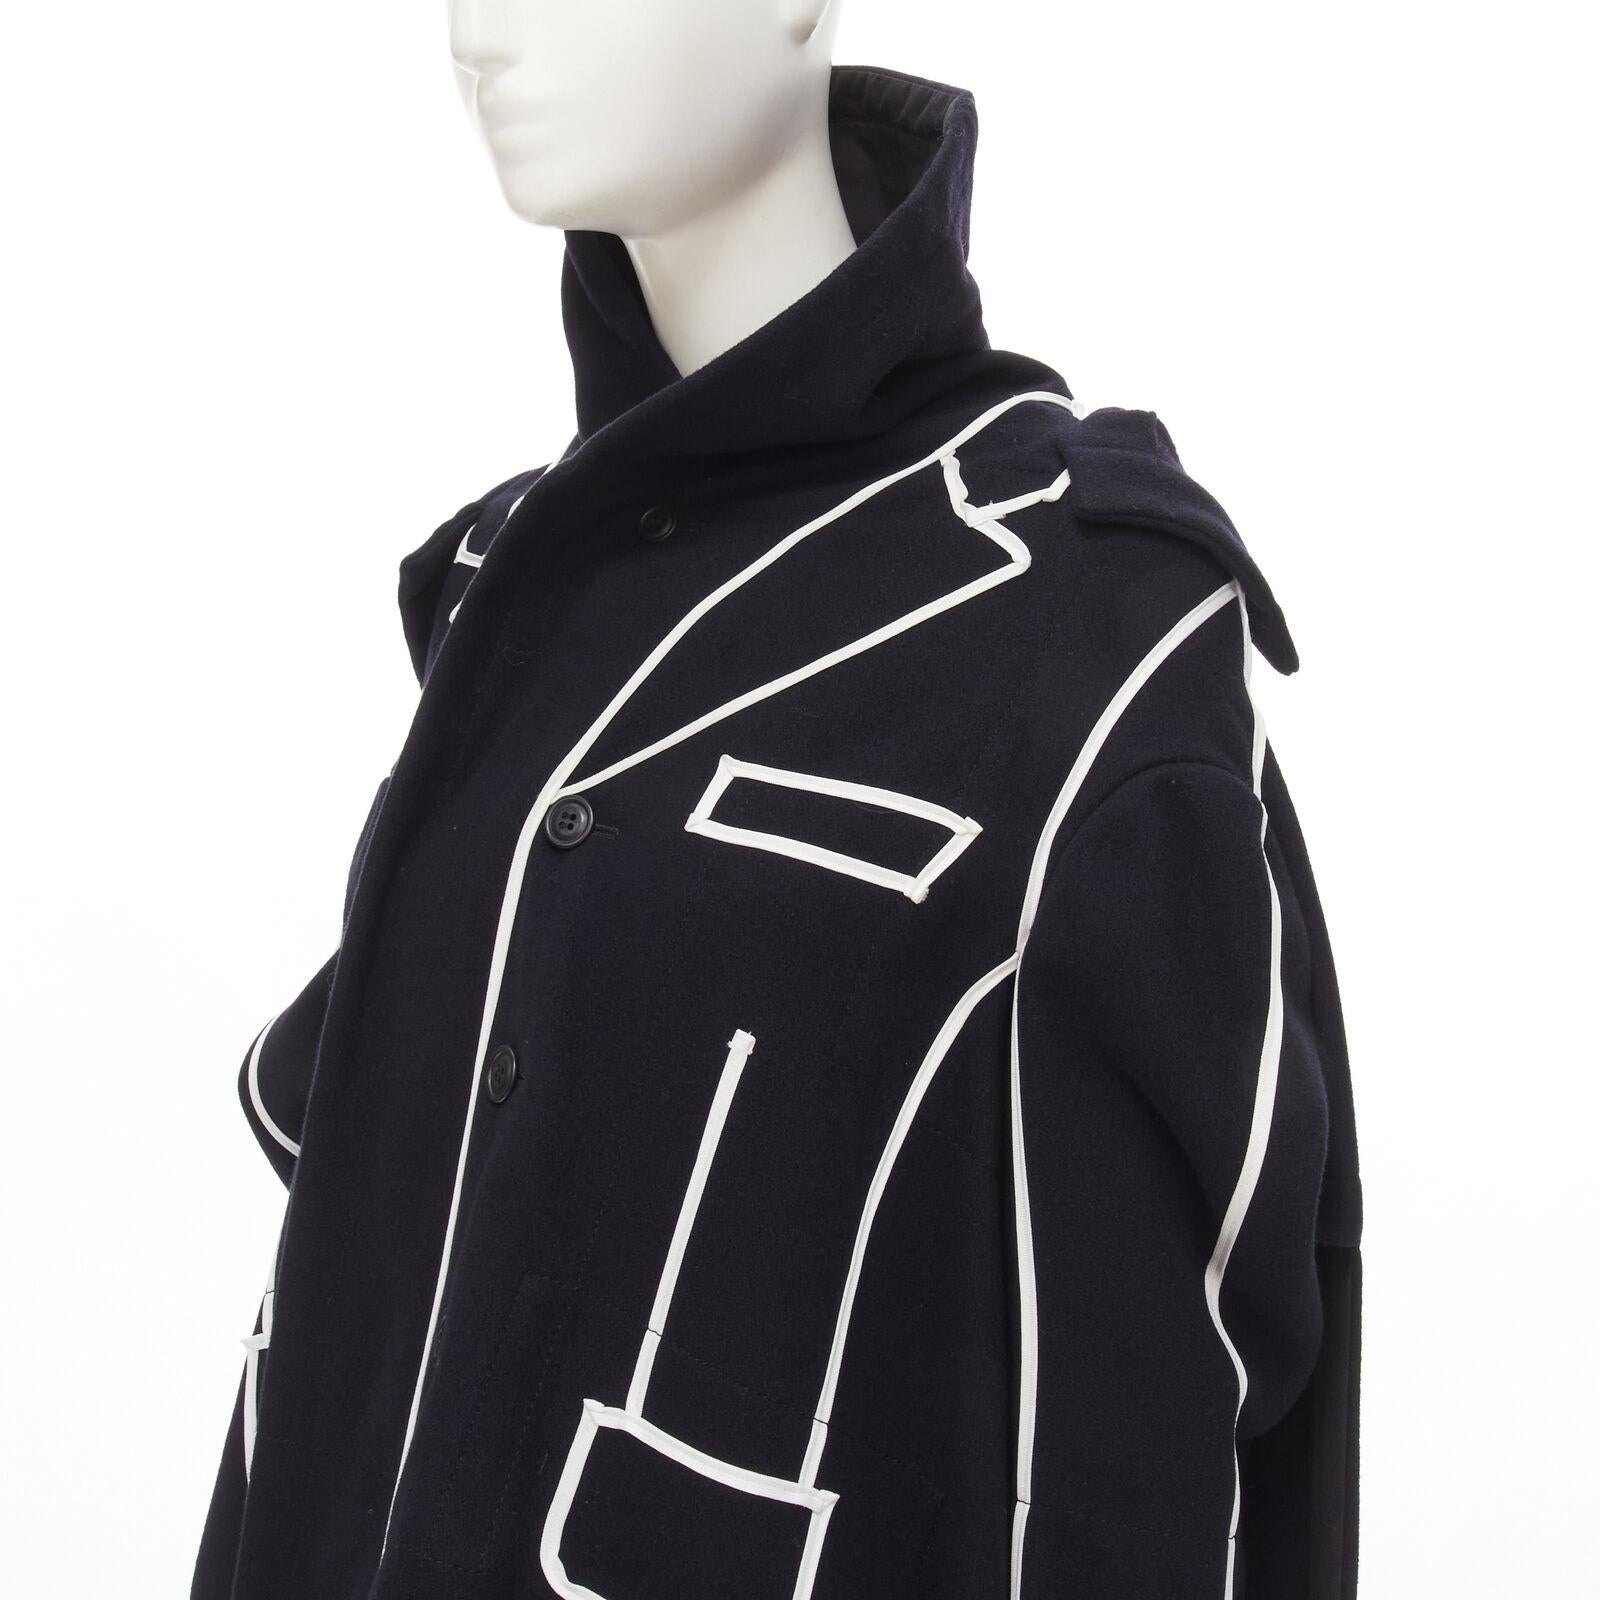 rare COMME DES GARCONS 2009 Runway black white tromp loeil piping trench coat XS
Reference: CRTI/A00685
Brand: Comme Des Garcons
Designer: Rei Kawakubo
Collection: 2009 - Runway
Material: Wool, Blend
Color: Black, White
Pattern: Abstract
Closure: